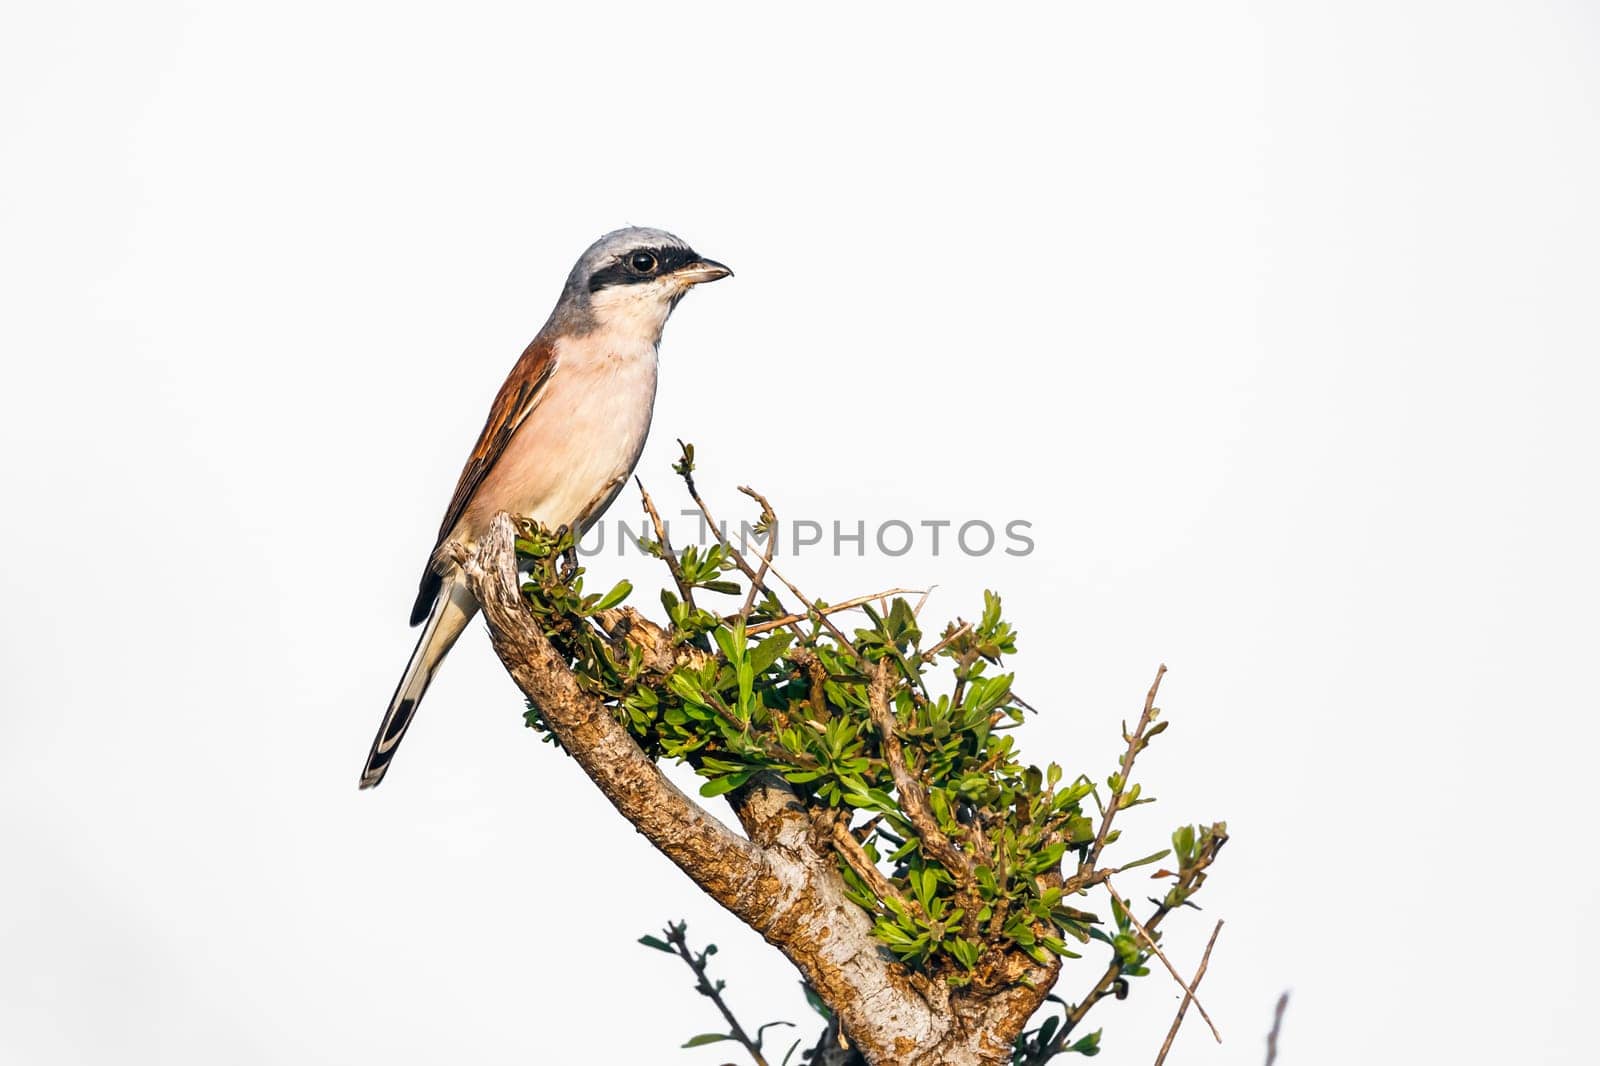 Red backed shrike in Kruger national park, South Africa by PACOCOMO